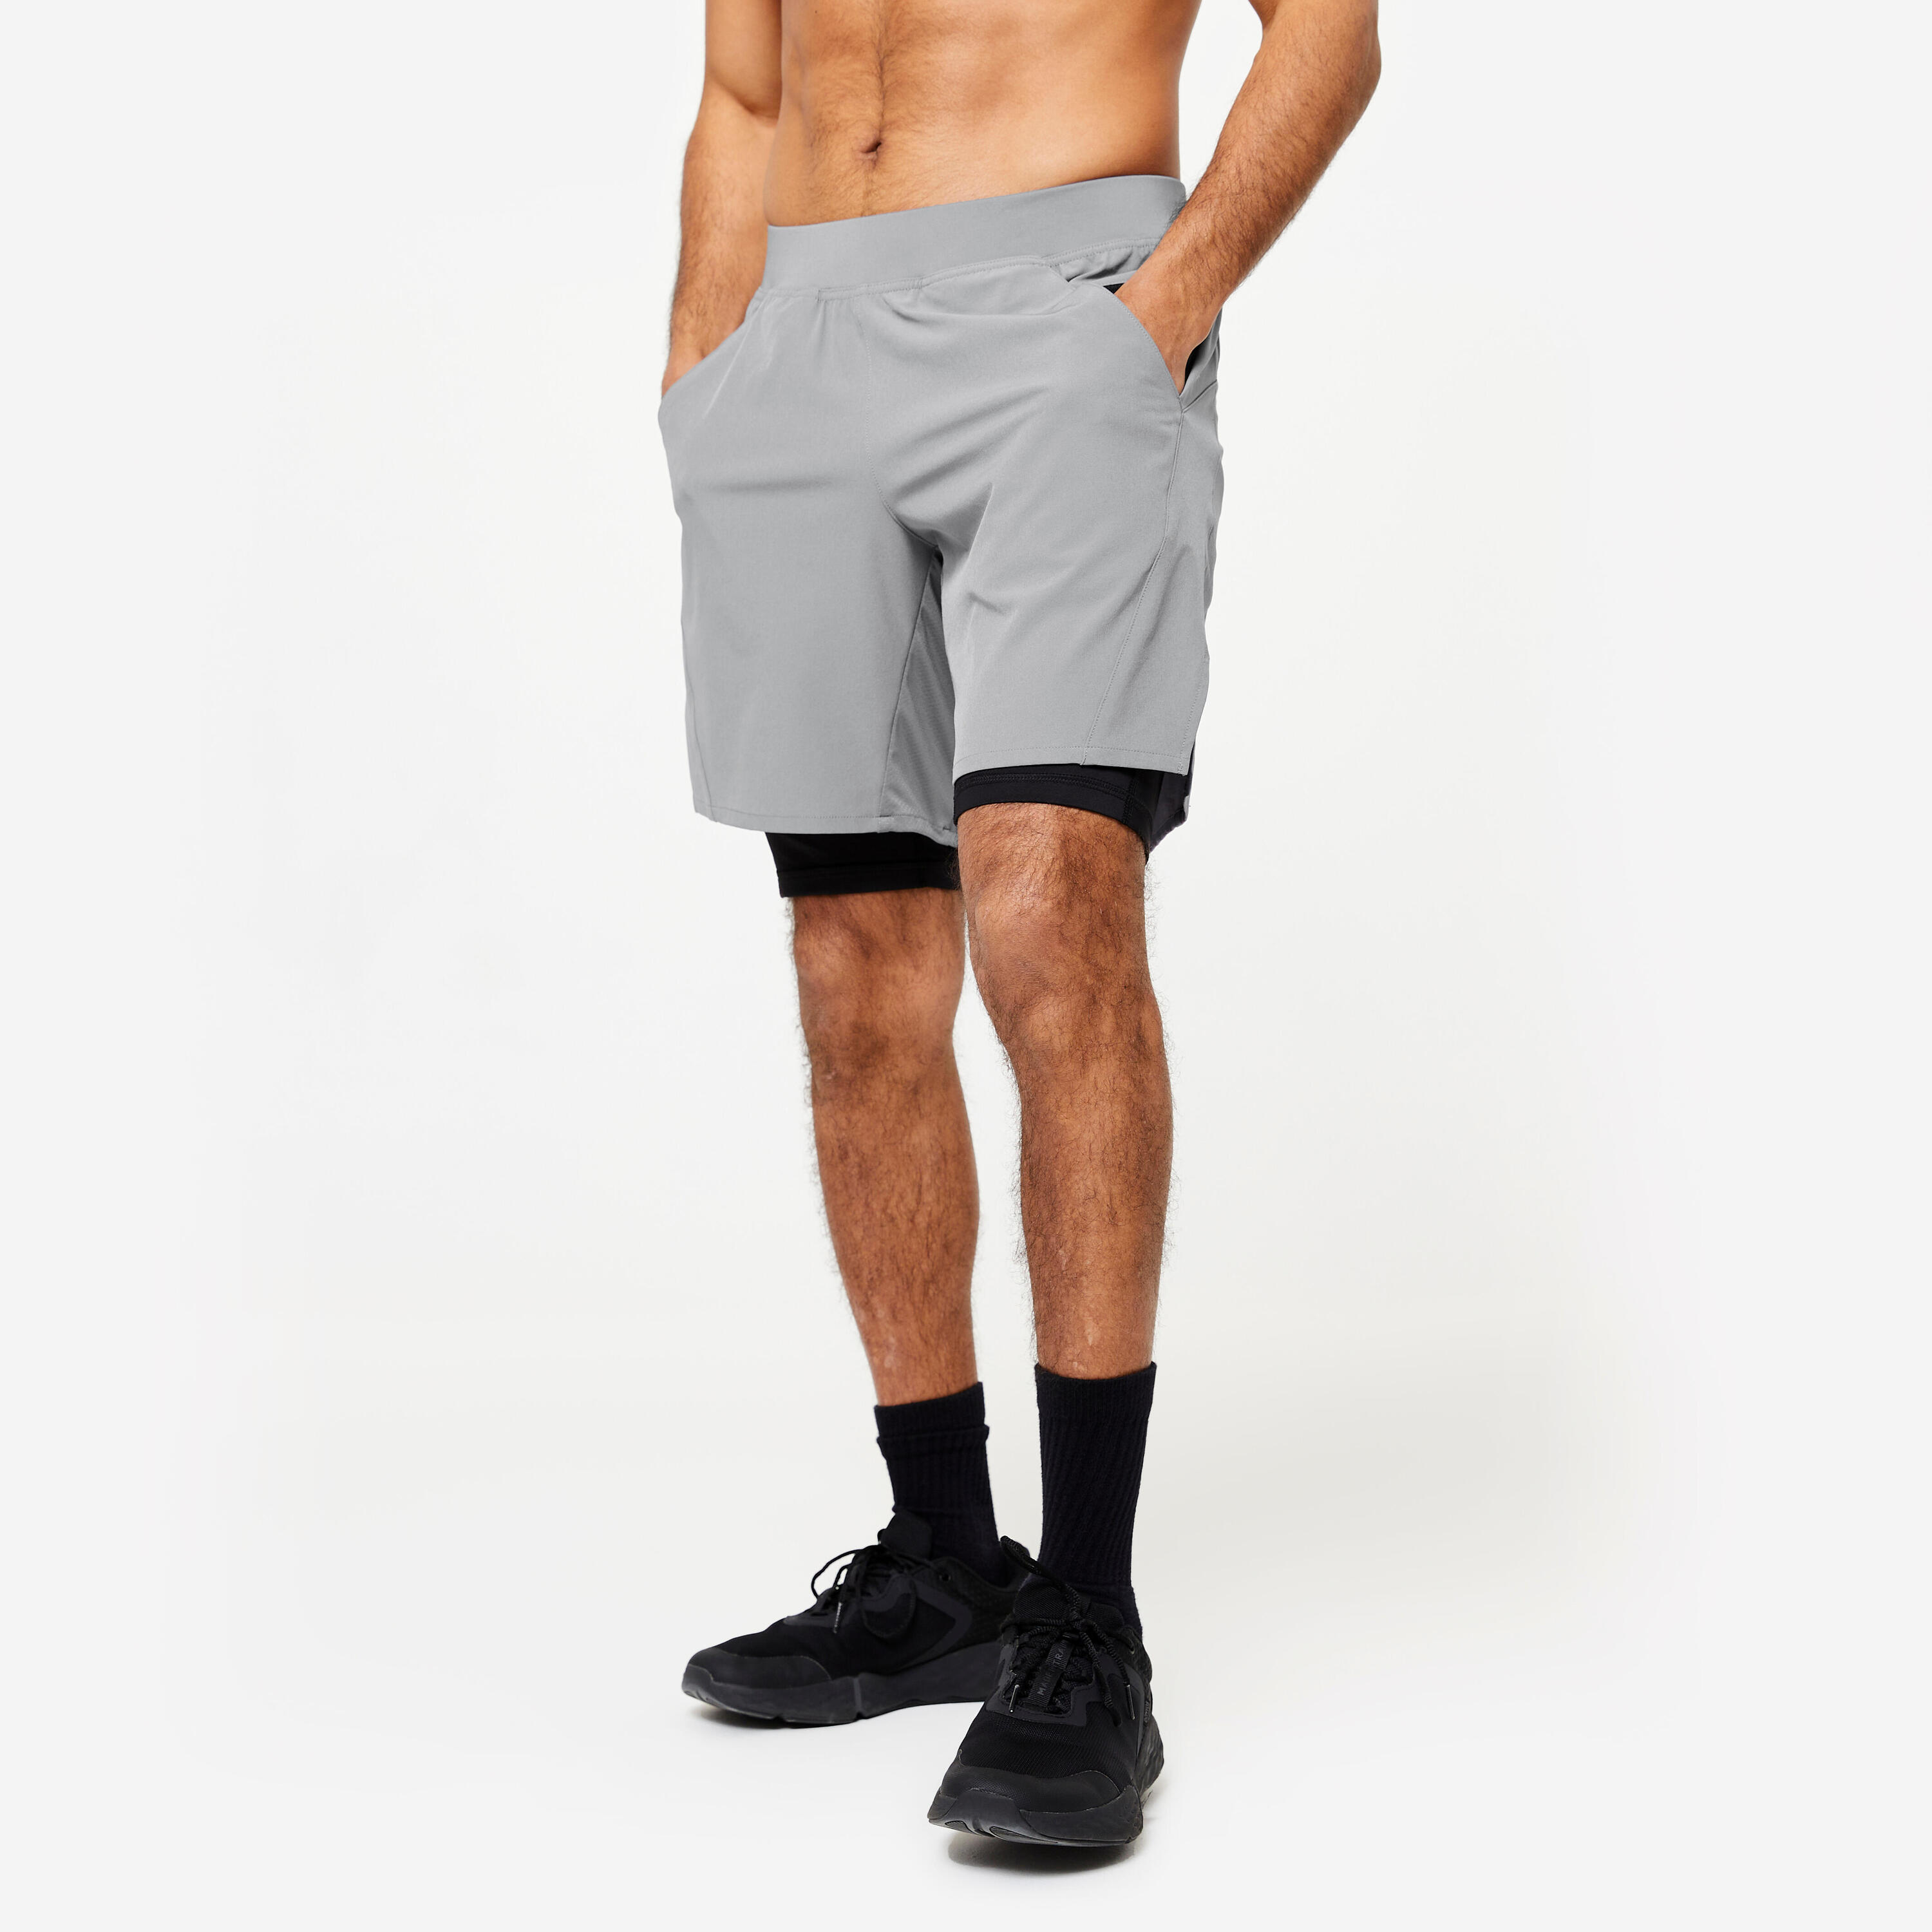 DOMYOS Breathable 2-in-1 Fitness Shorts with Zip Pocket - Grey